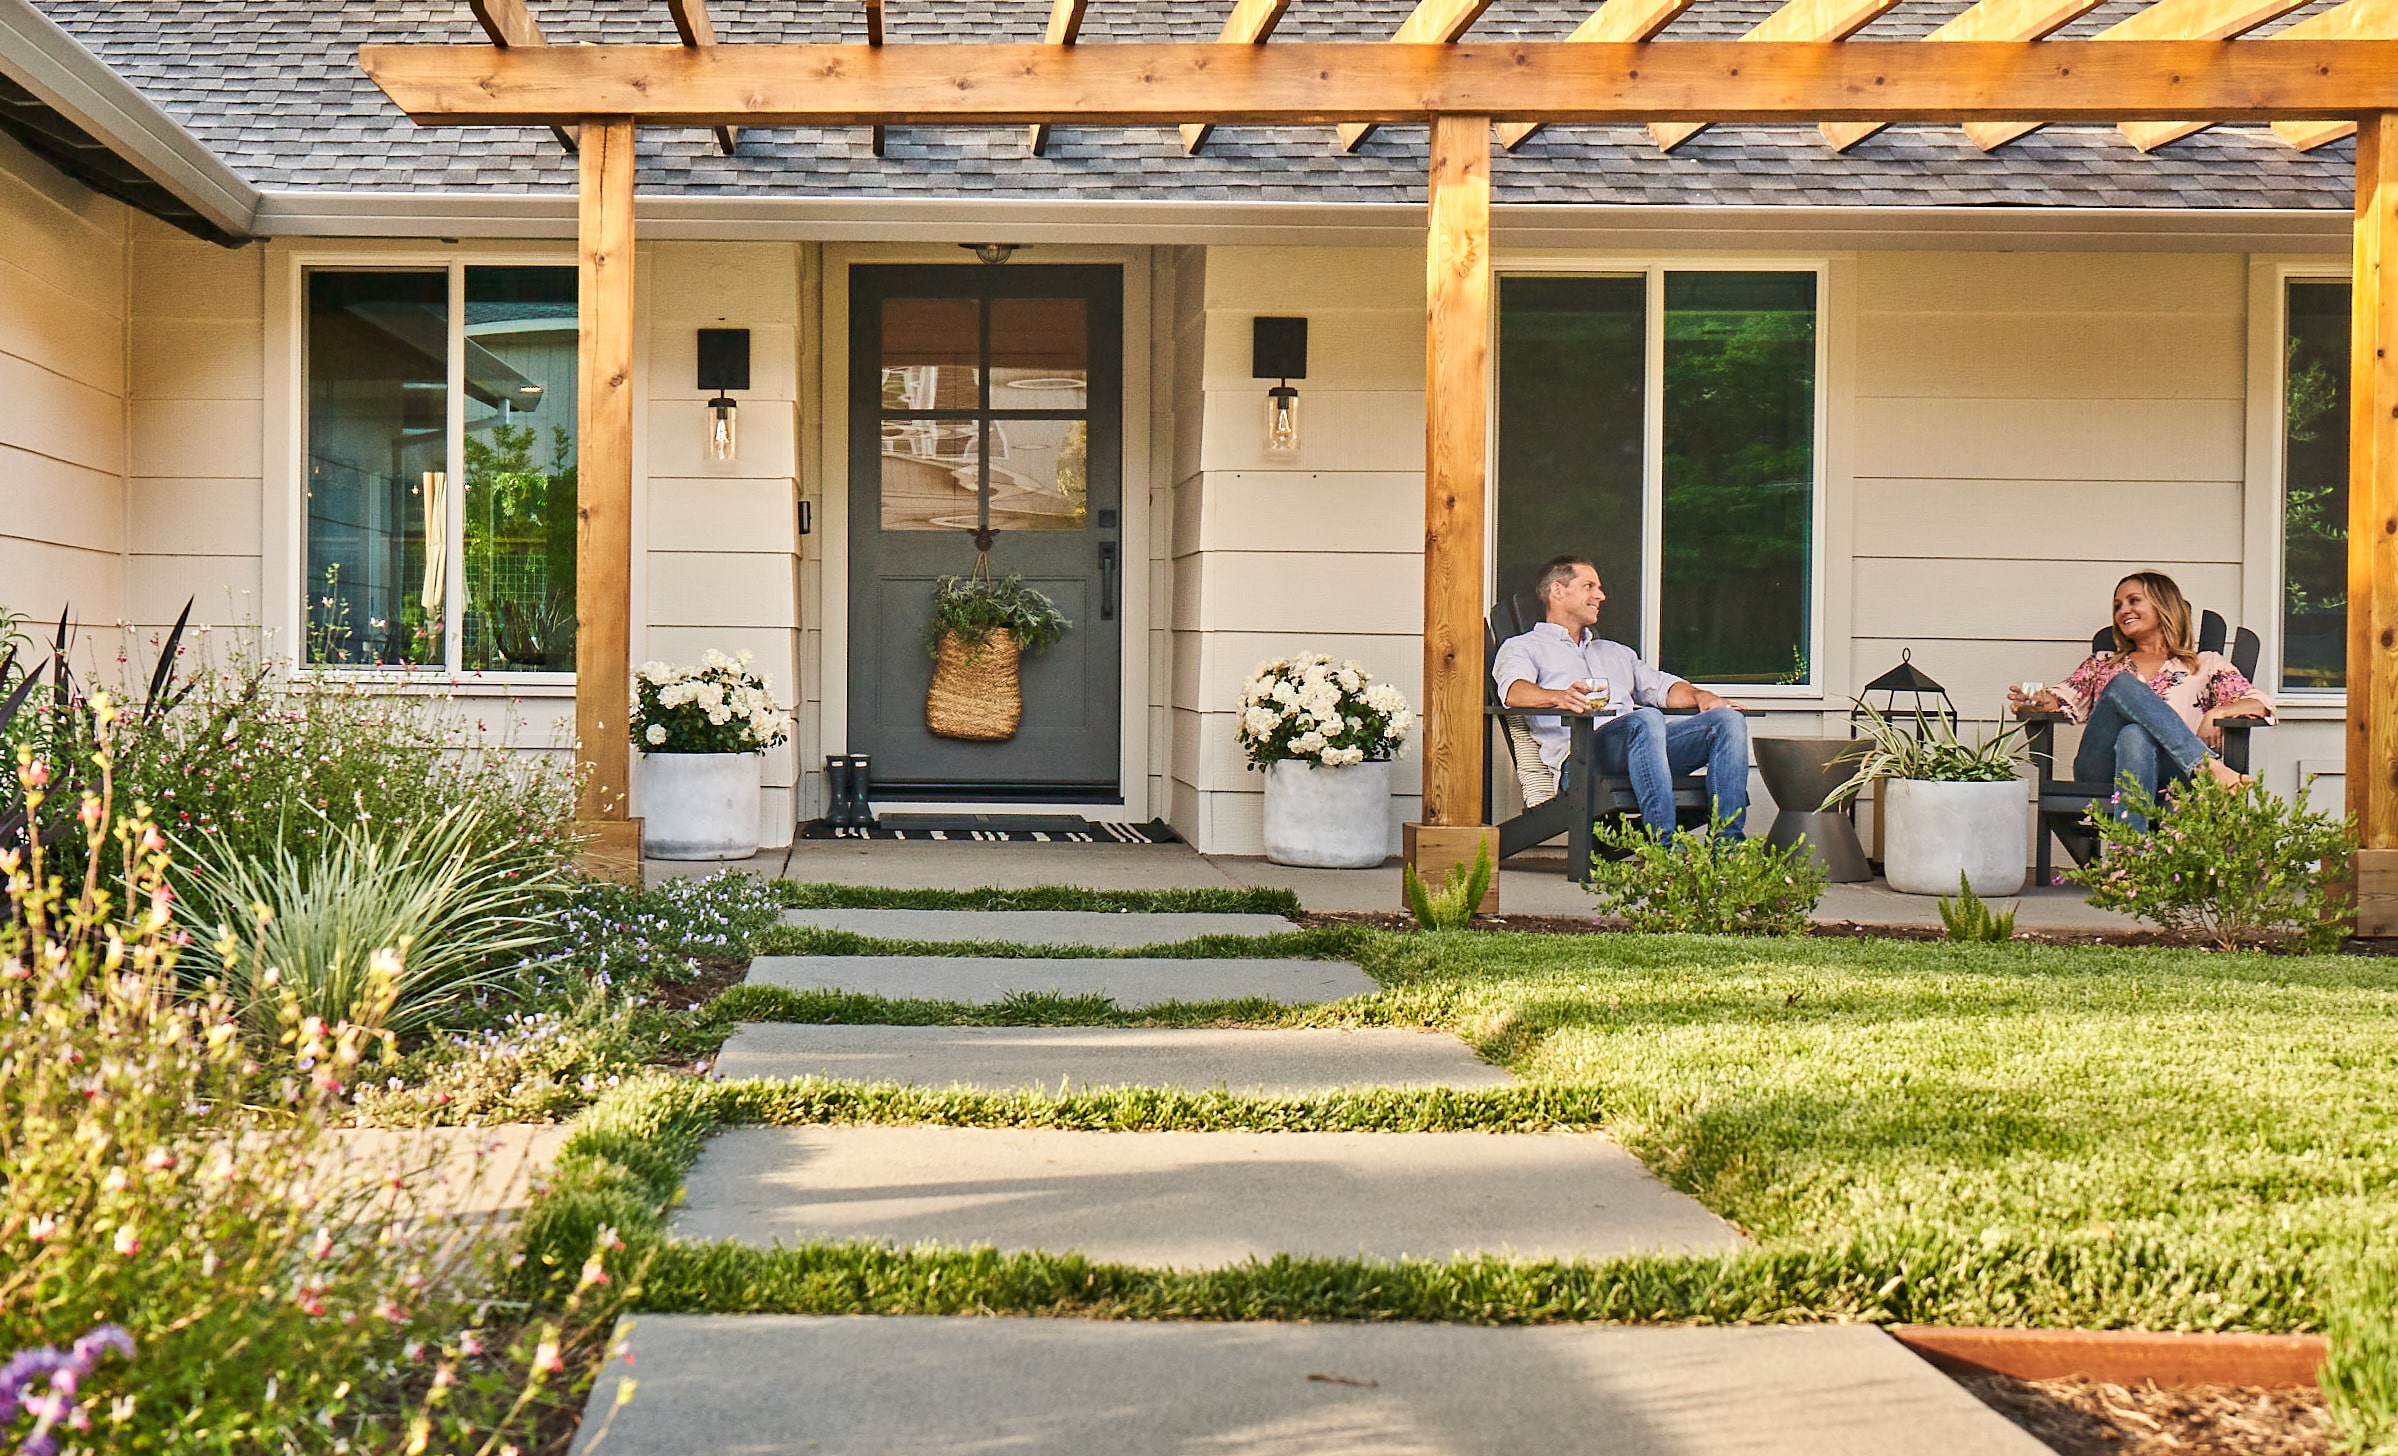 Man and woman sitting on front porch with overhead wooden pergola and paver walkway across front lawn